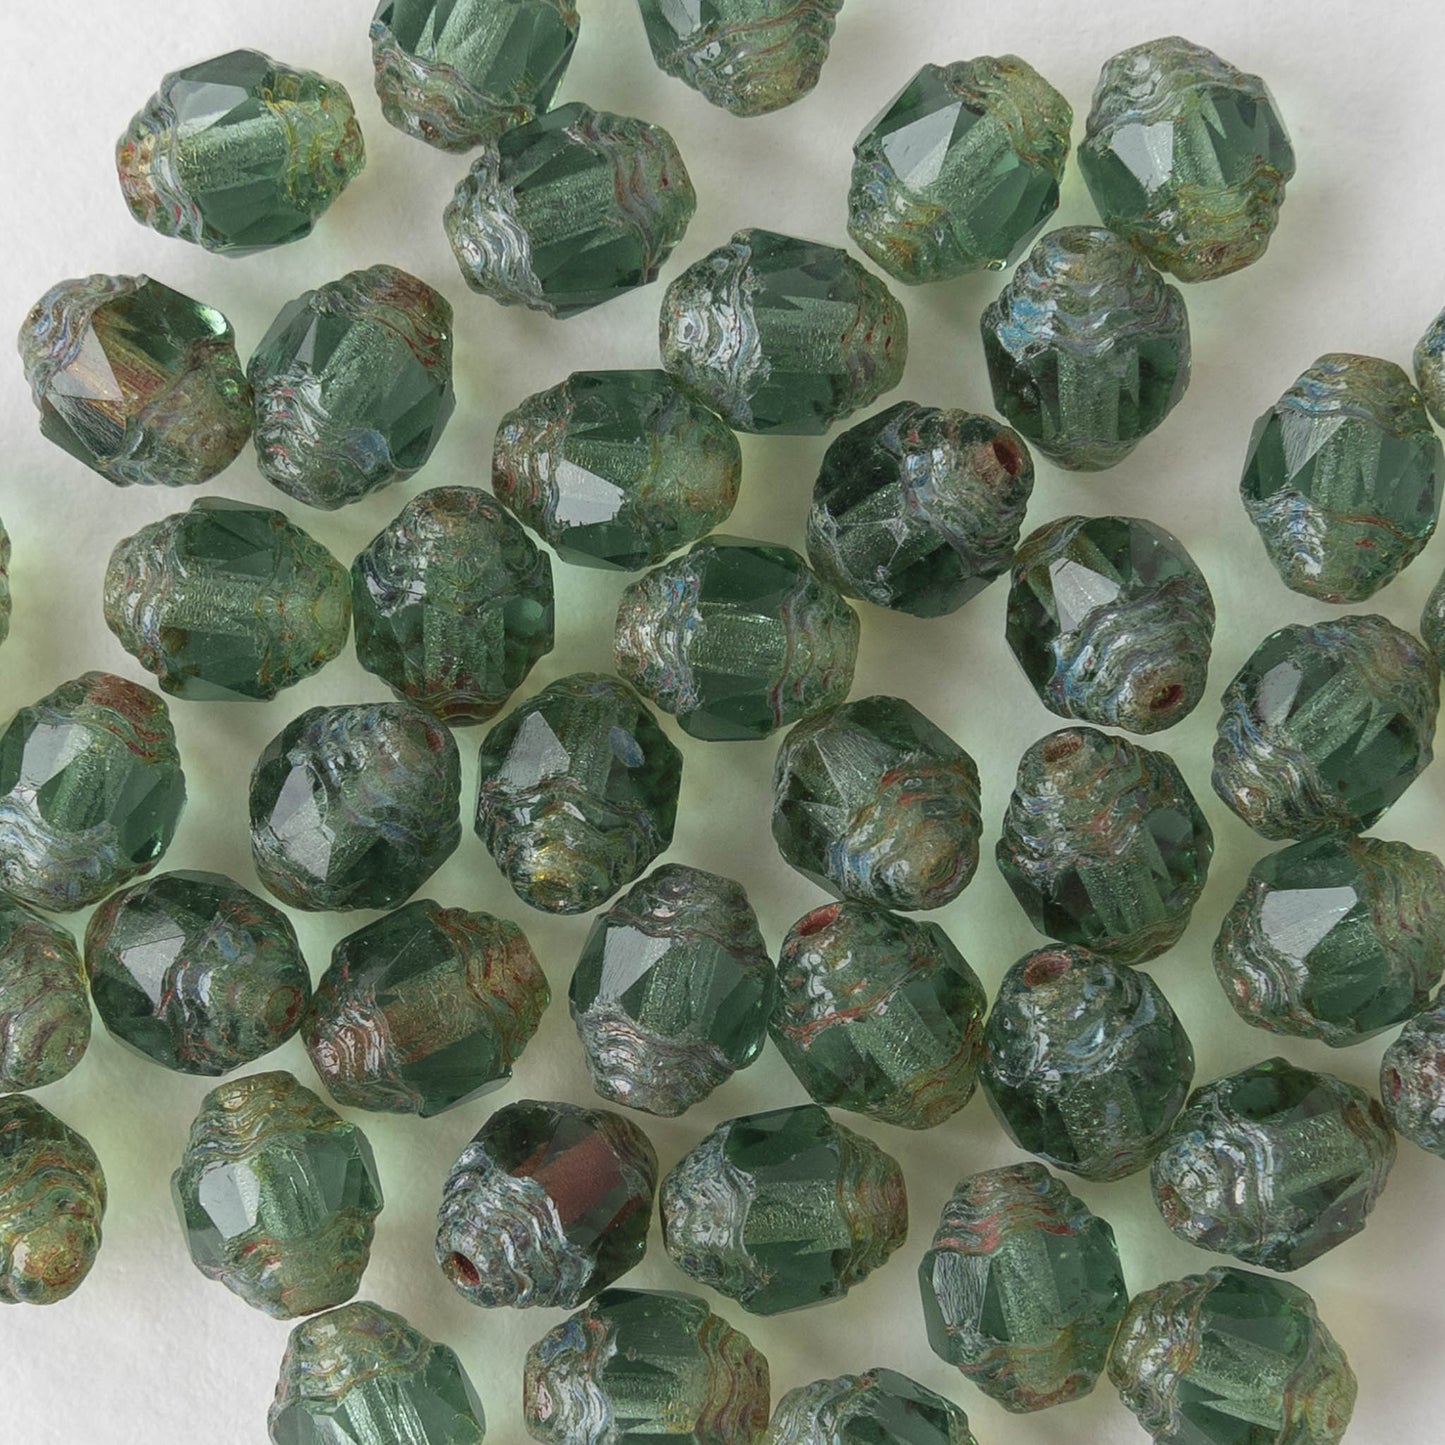 6x8mm Faceted Prop Beads - Light Green Picasso - 20 beads